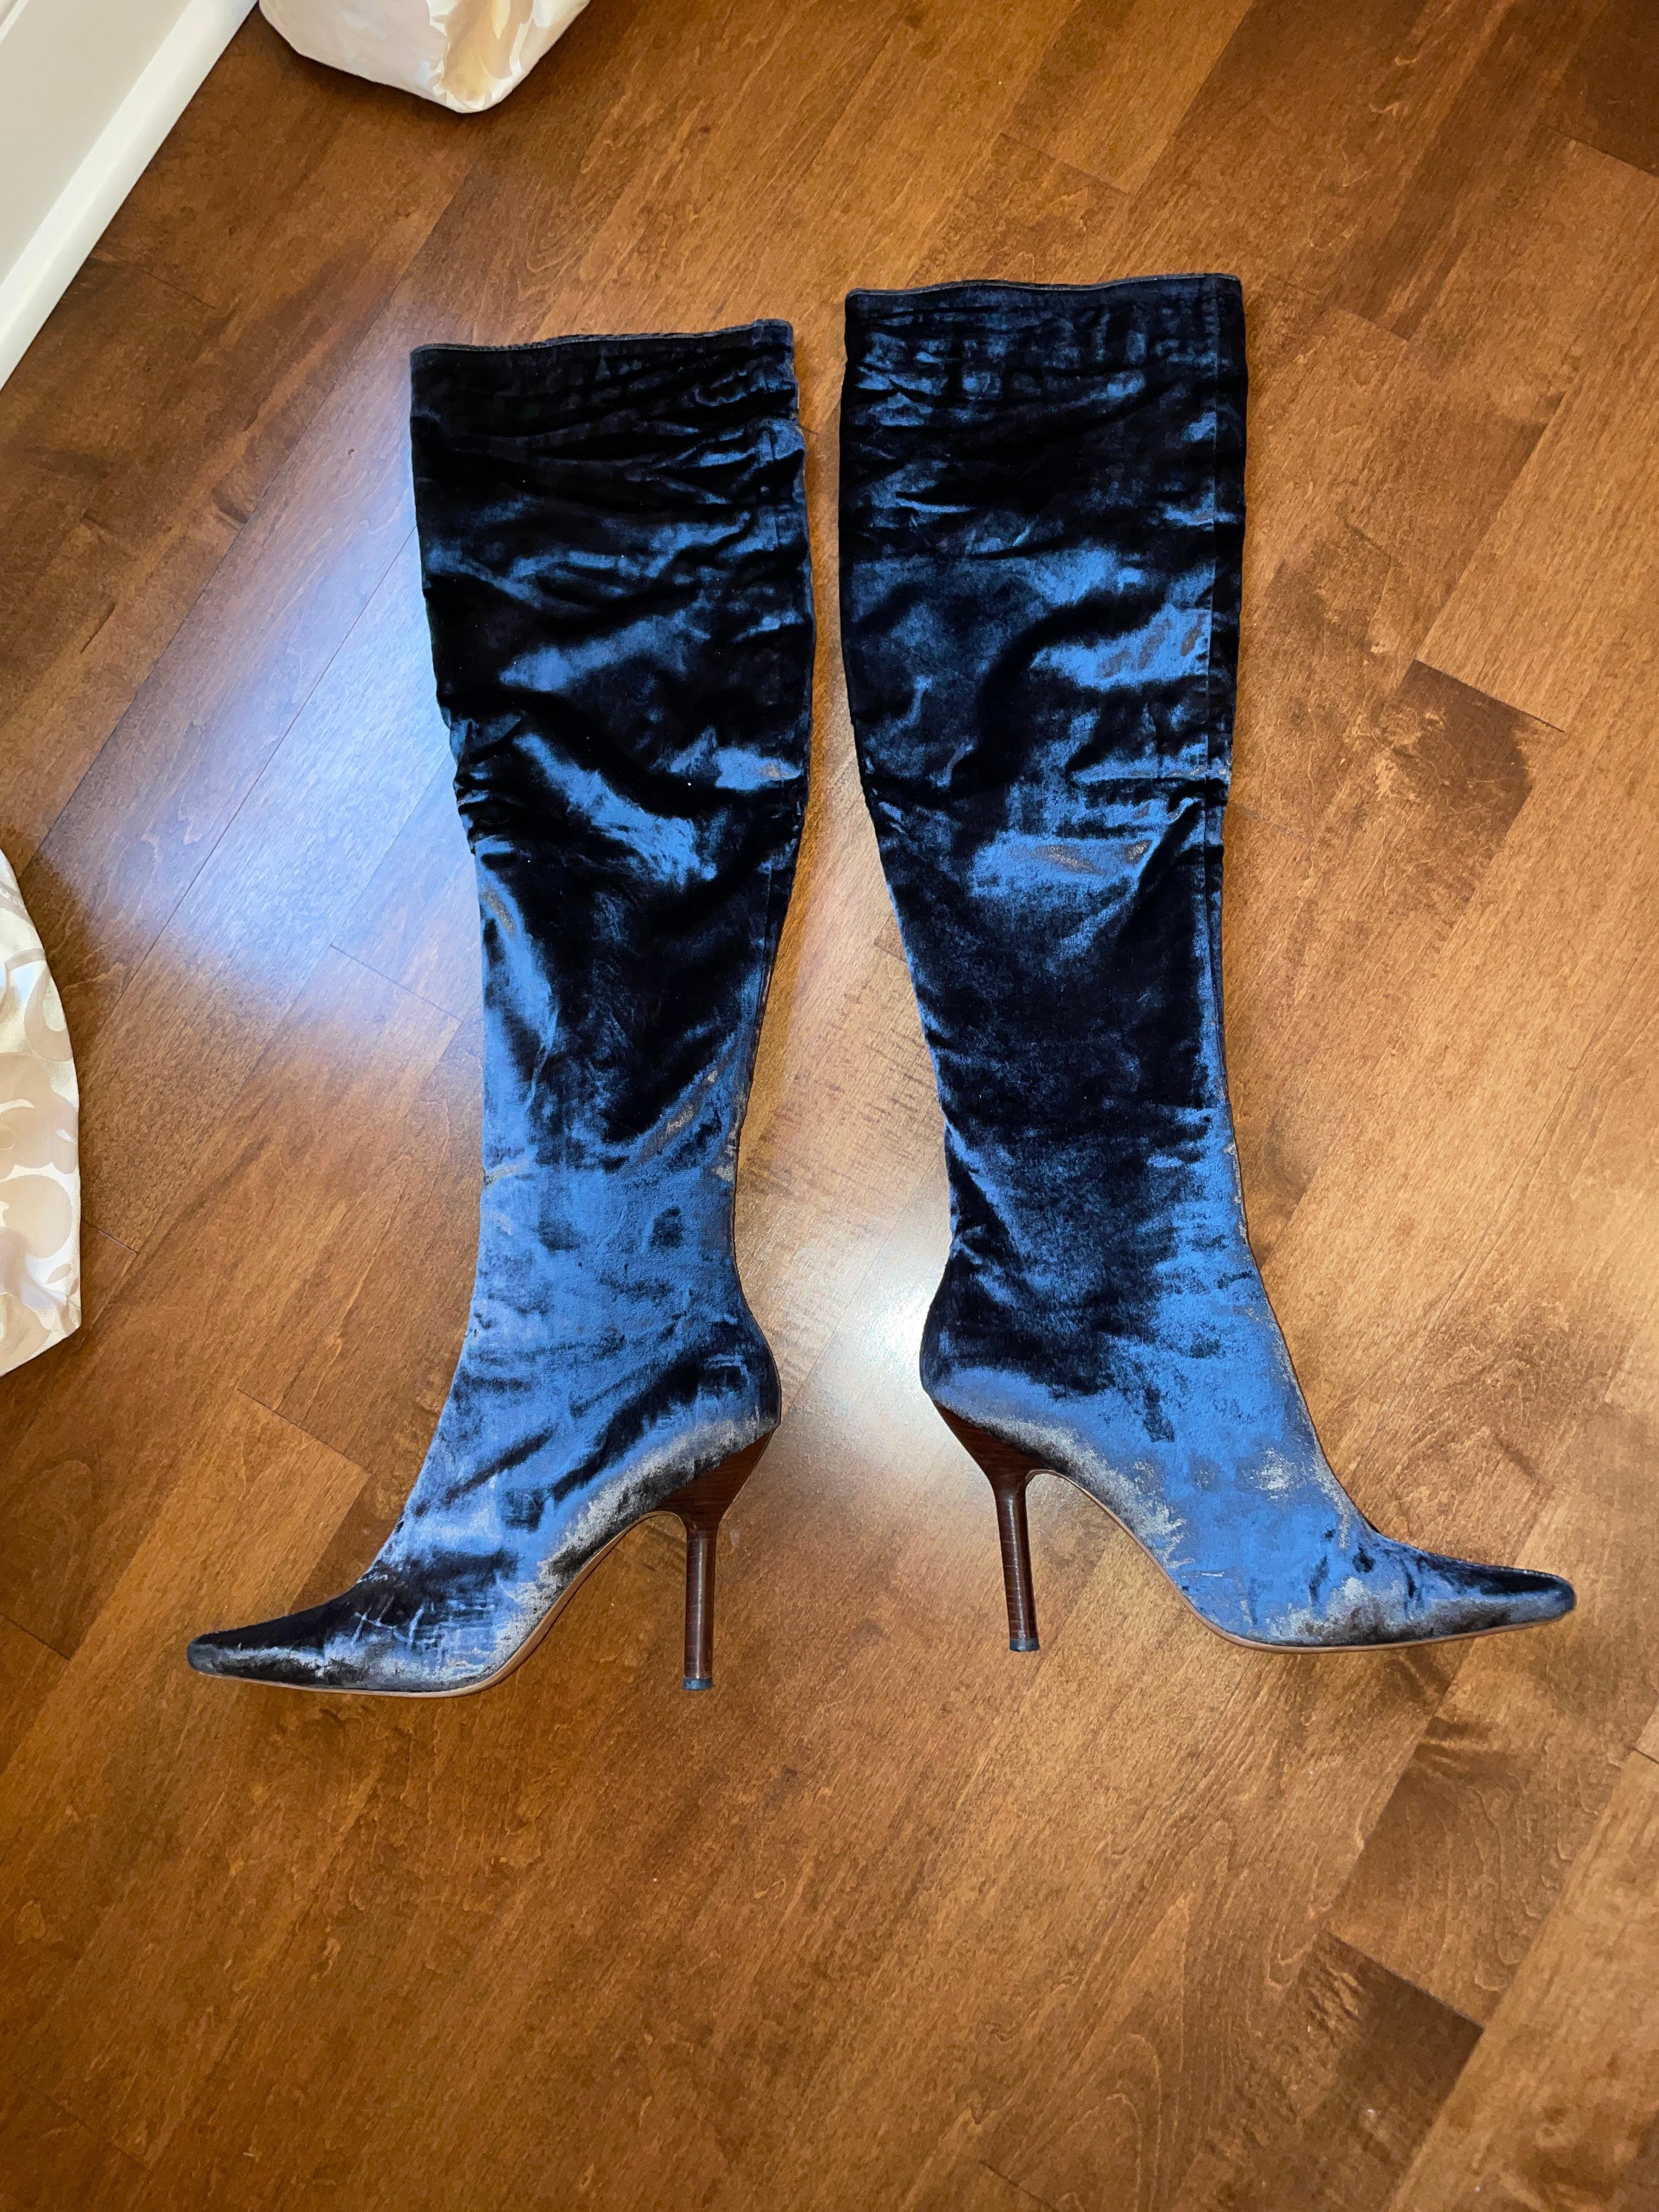 Tom Ford for Gucci velour velvet dark grey gray over-the-knee wooden heel boots size 40 AW99 1999 seen on both the runway and in the ad campaign. Iconic and extremely flattering / easy to walk in! Excellent condition! size 40 so I believe that is a